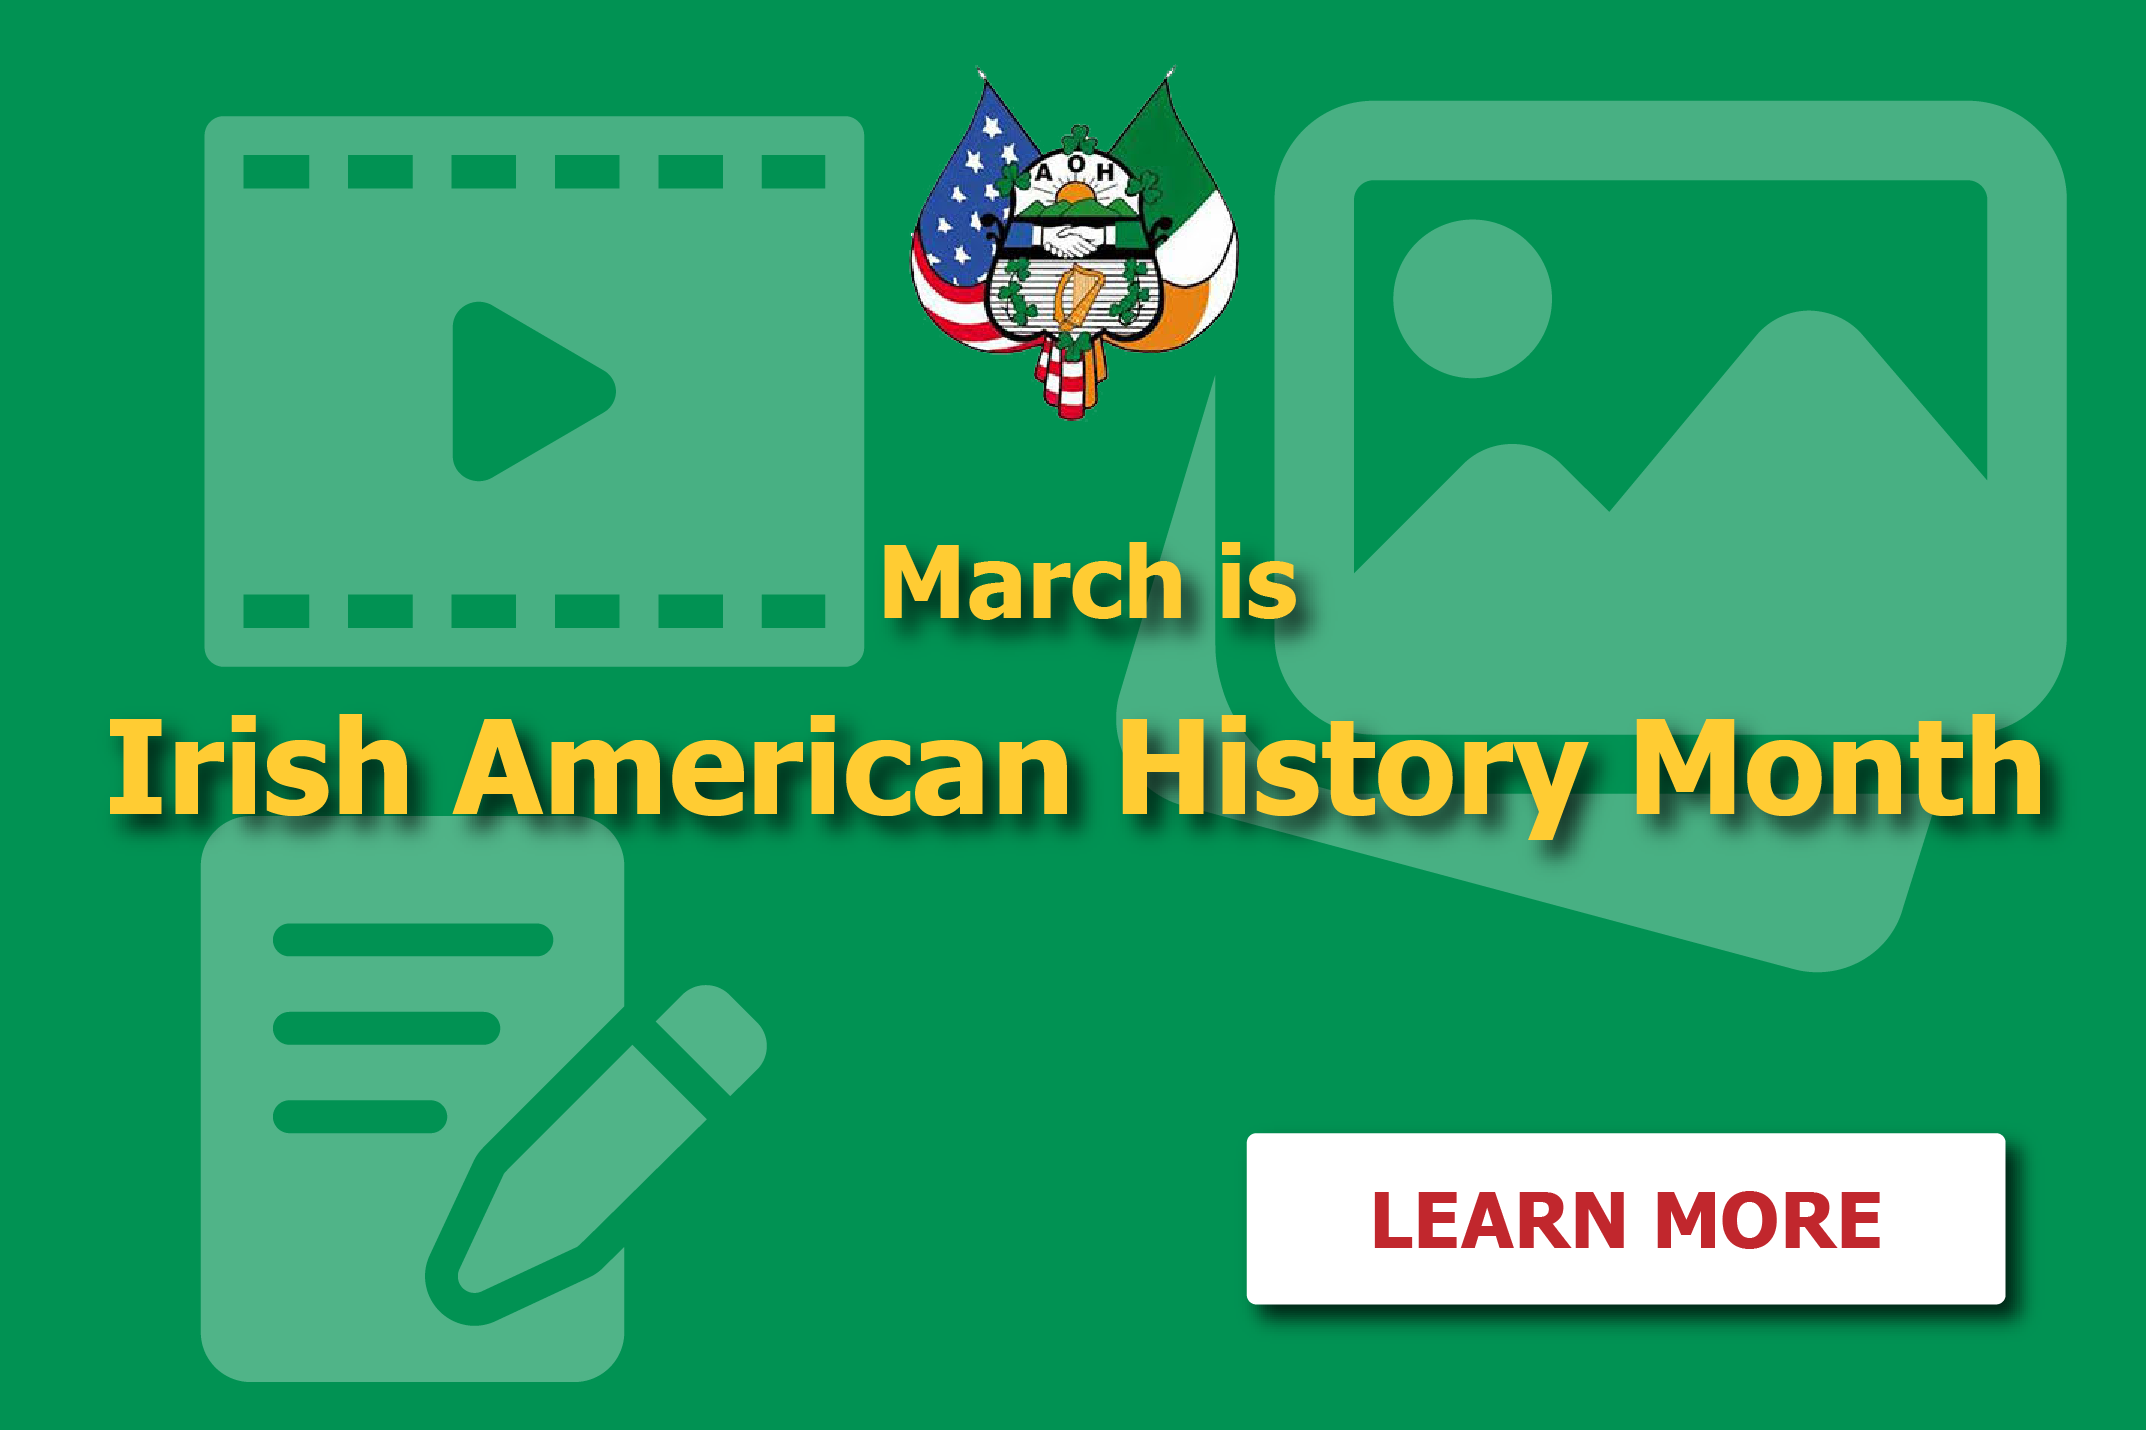 March is Irish American History Month